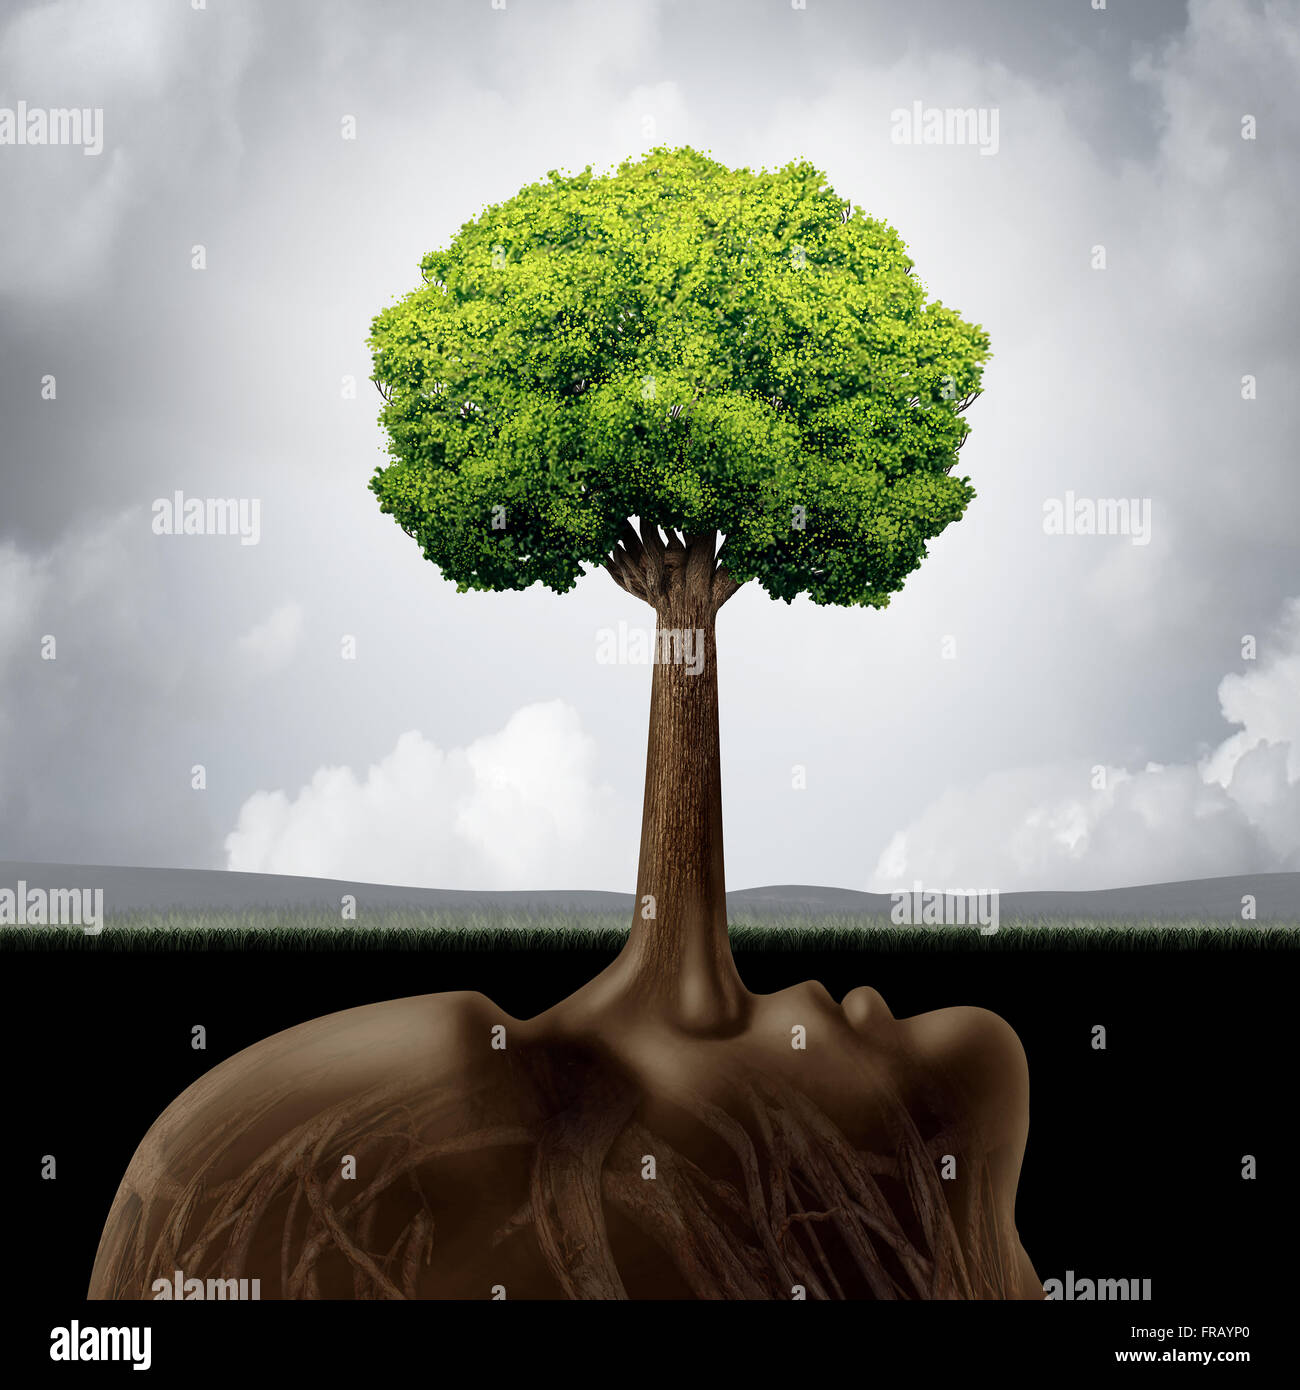 Liar concept as a corruption symbol for built on lies as a long nose protruding out shaped as a green tree providing false guidance and fraudulent advice in business or the environment.. Stock Photo